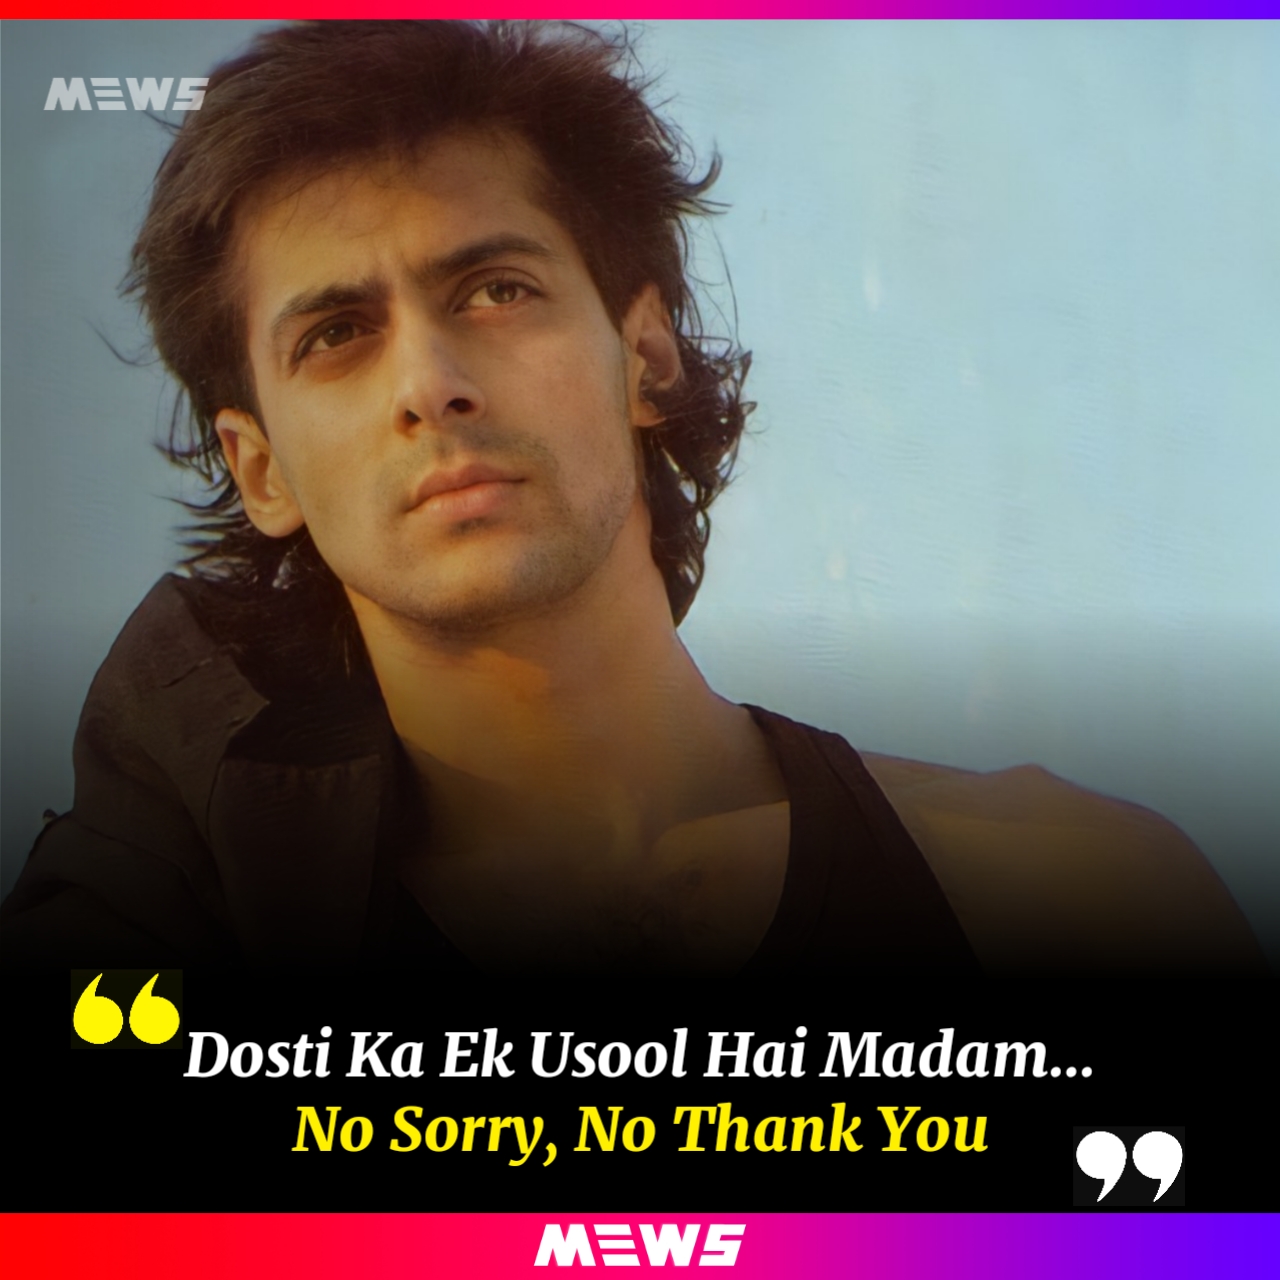 famous dialogues of Bollywood